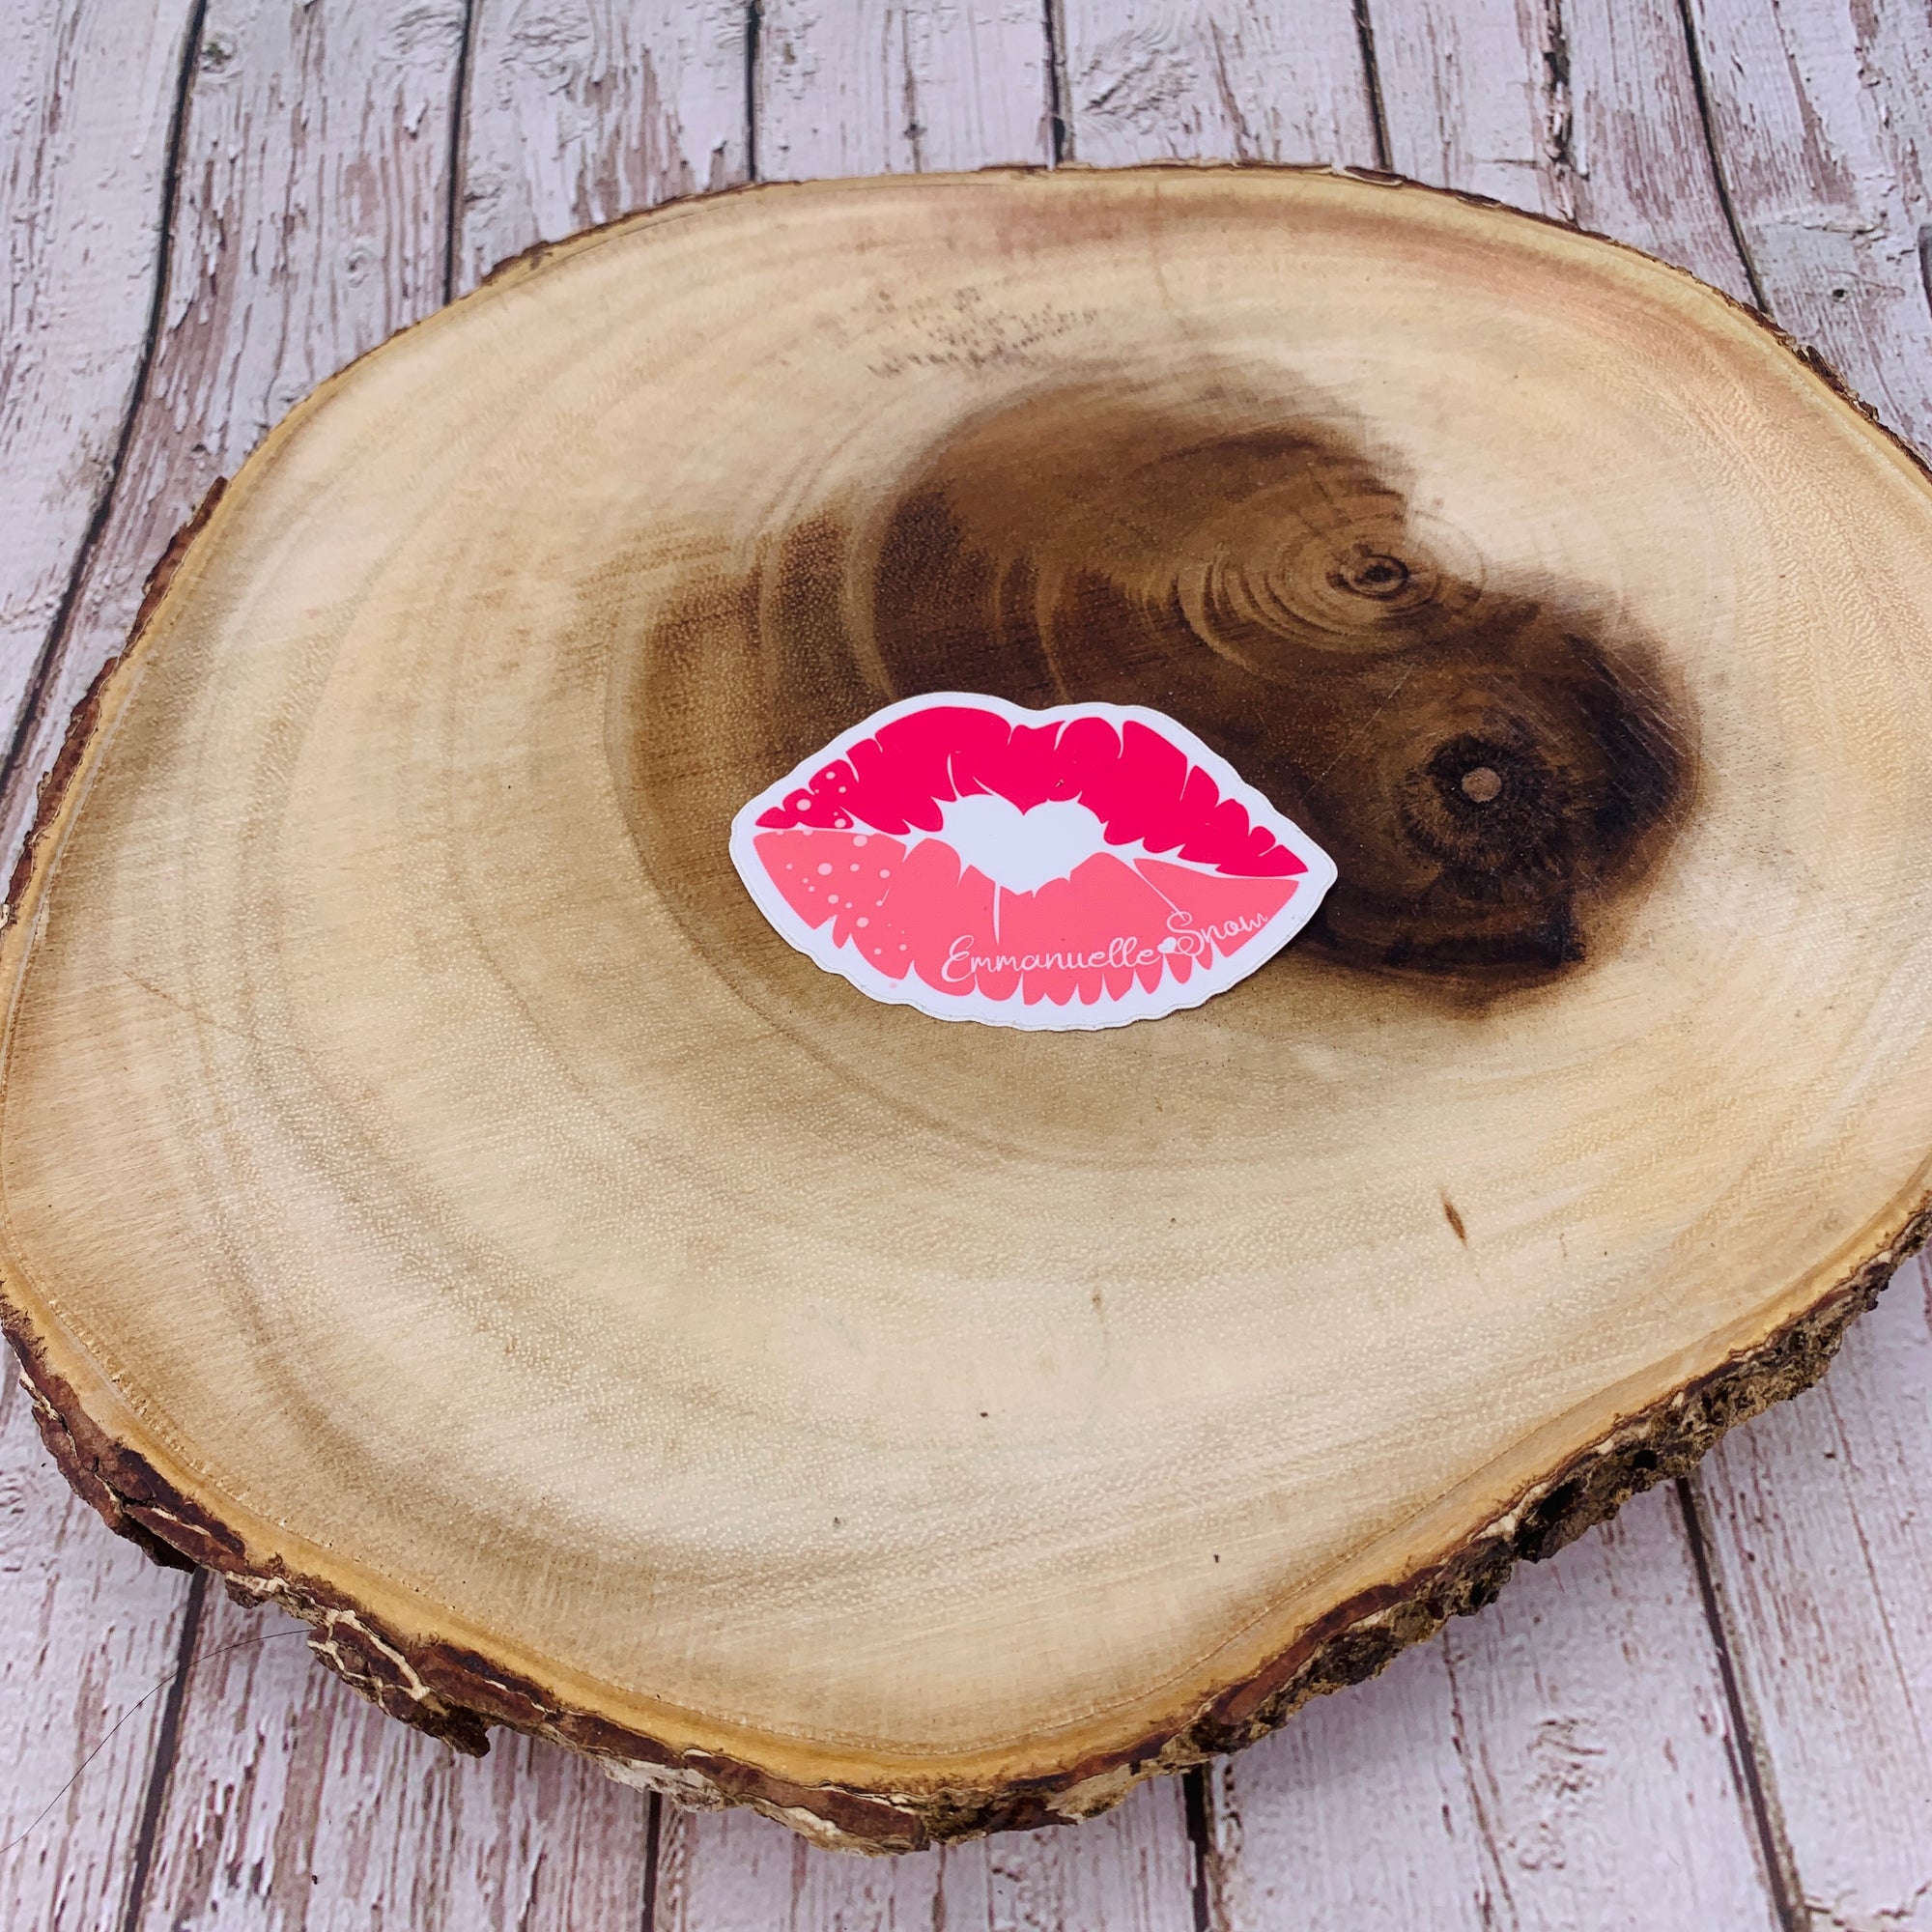 super colorful sticker statement steamy sassy kiss smack red pink lips Emmanuelle Snow bestseller author 